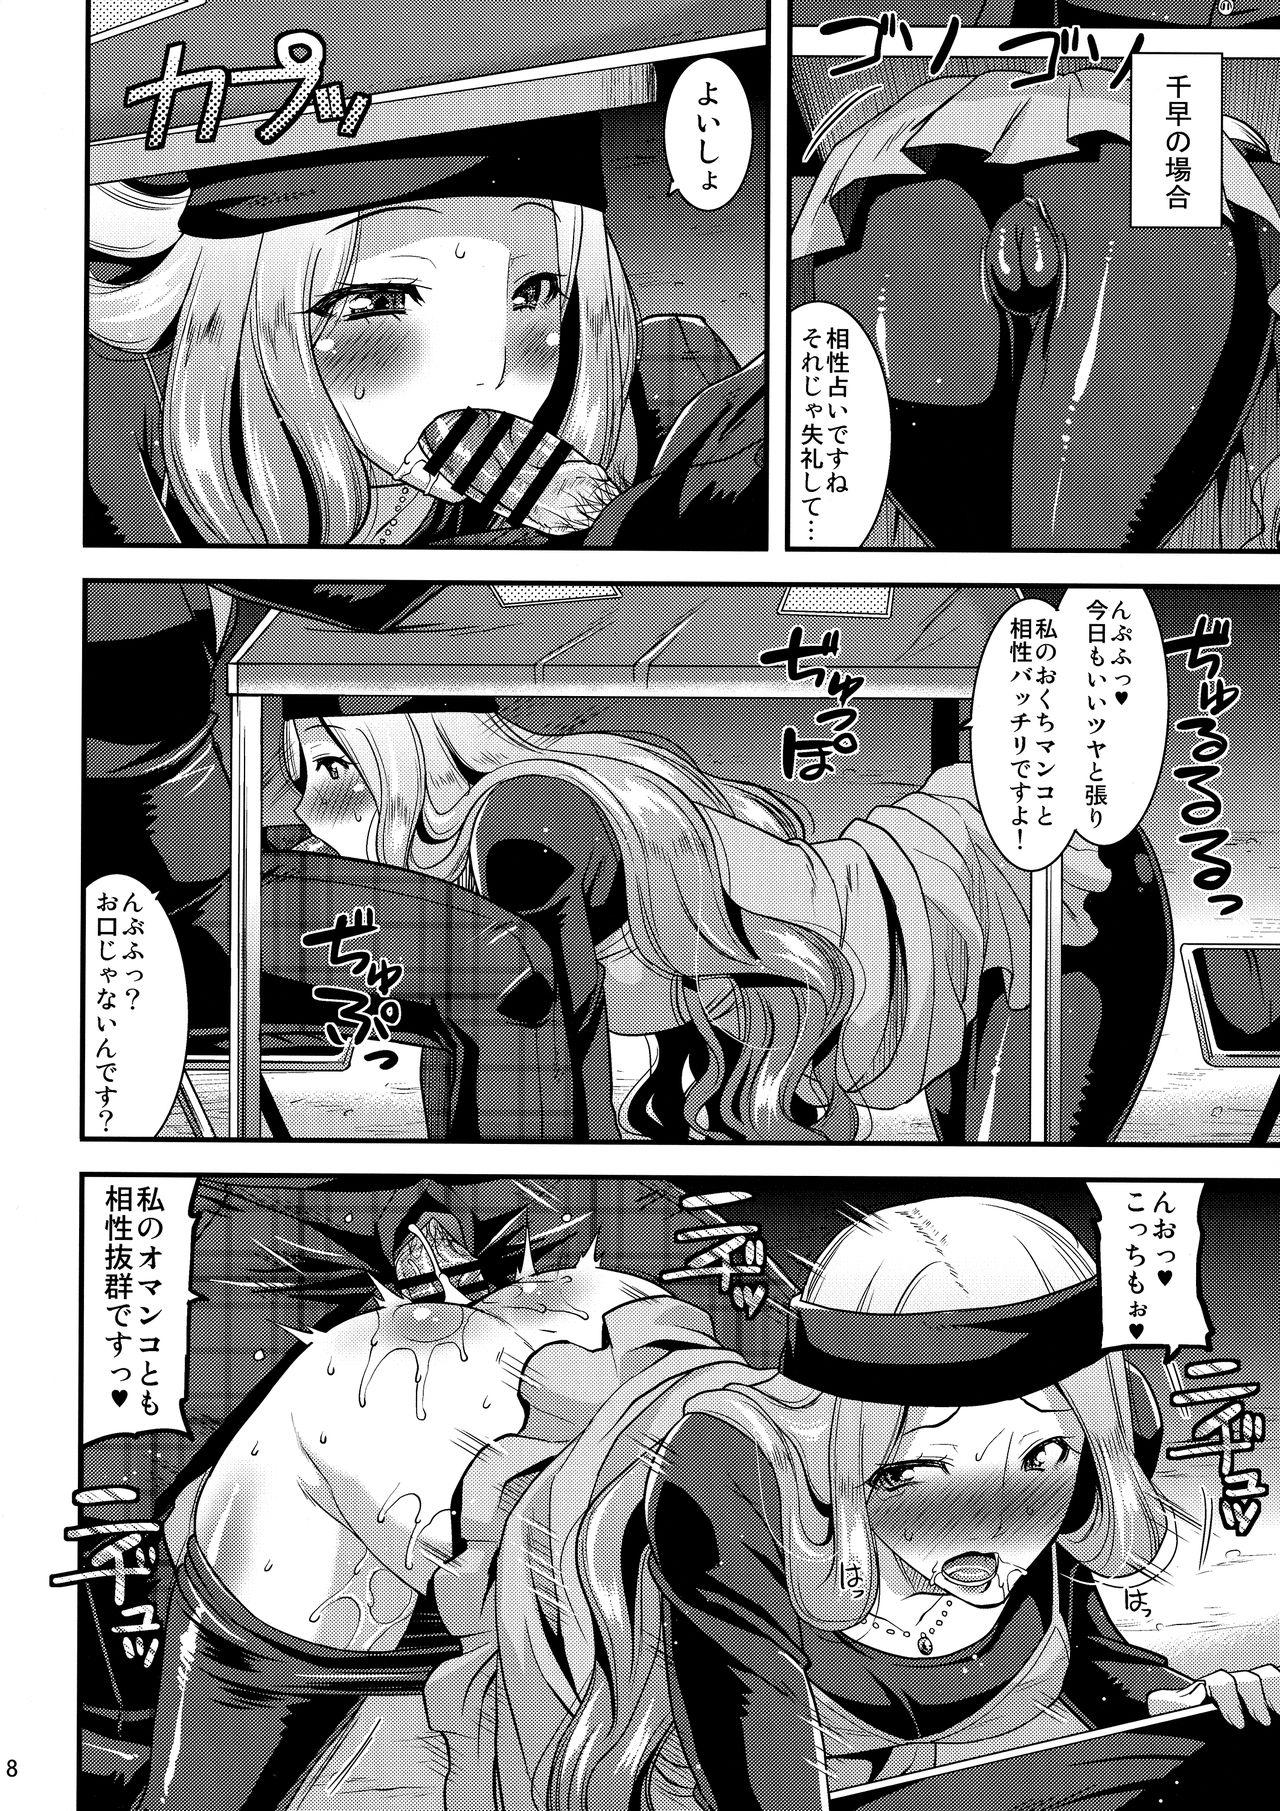 Heels LET US START THE SEX - Persona 5 Peeing - Page 7